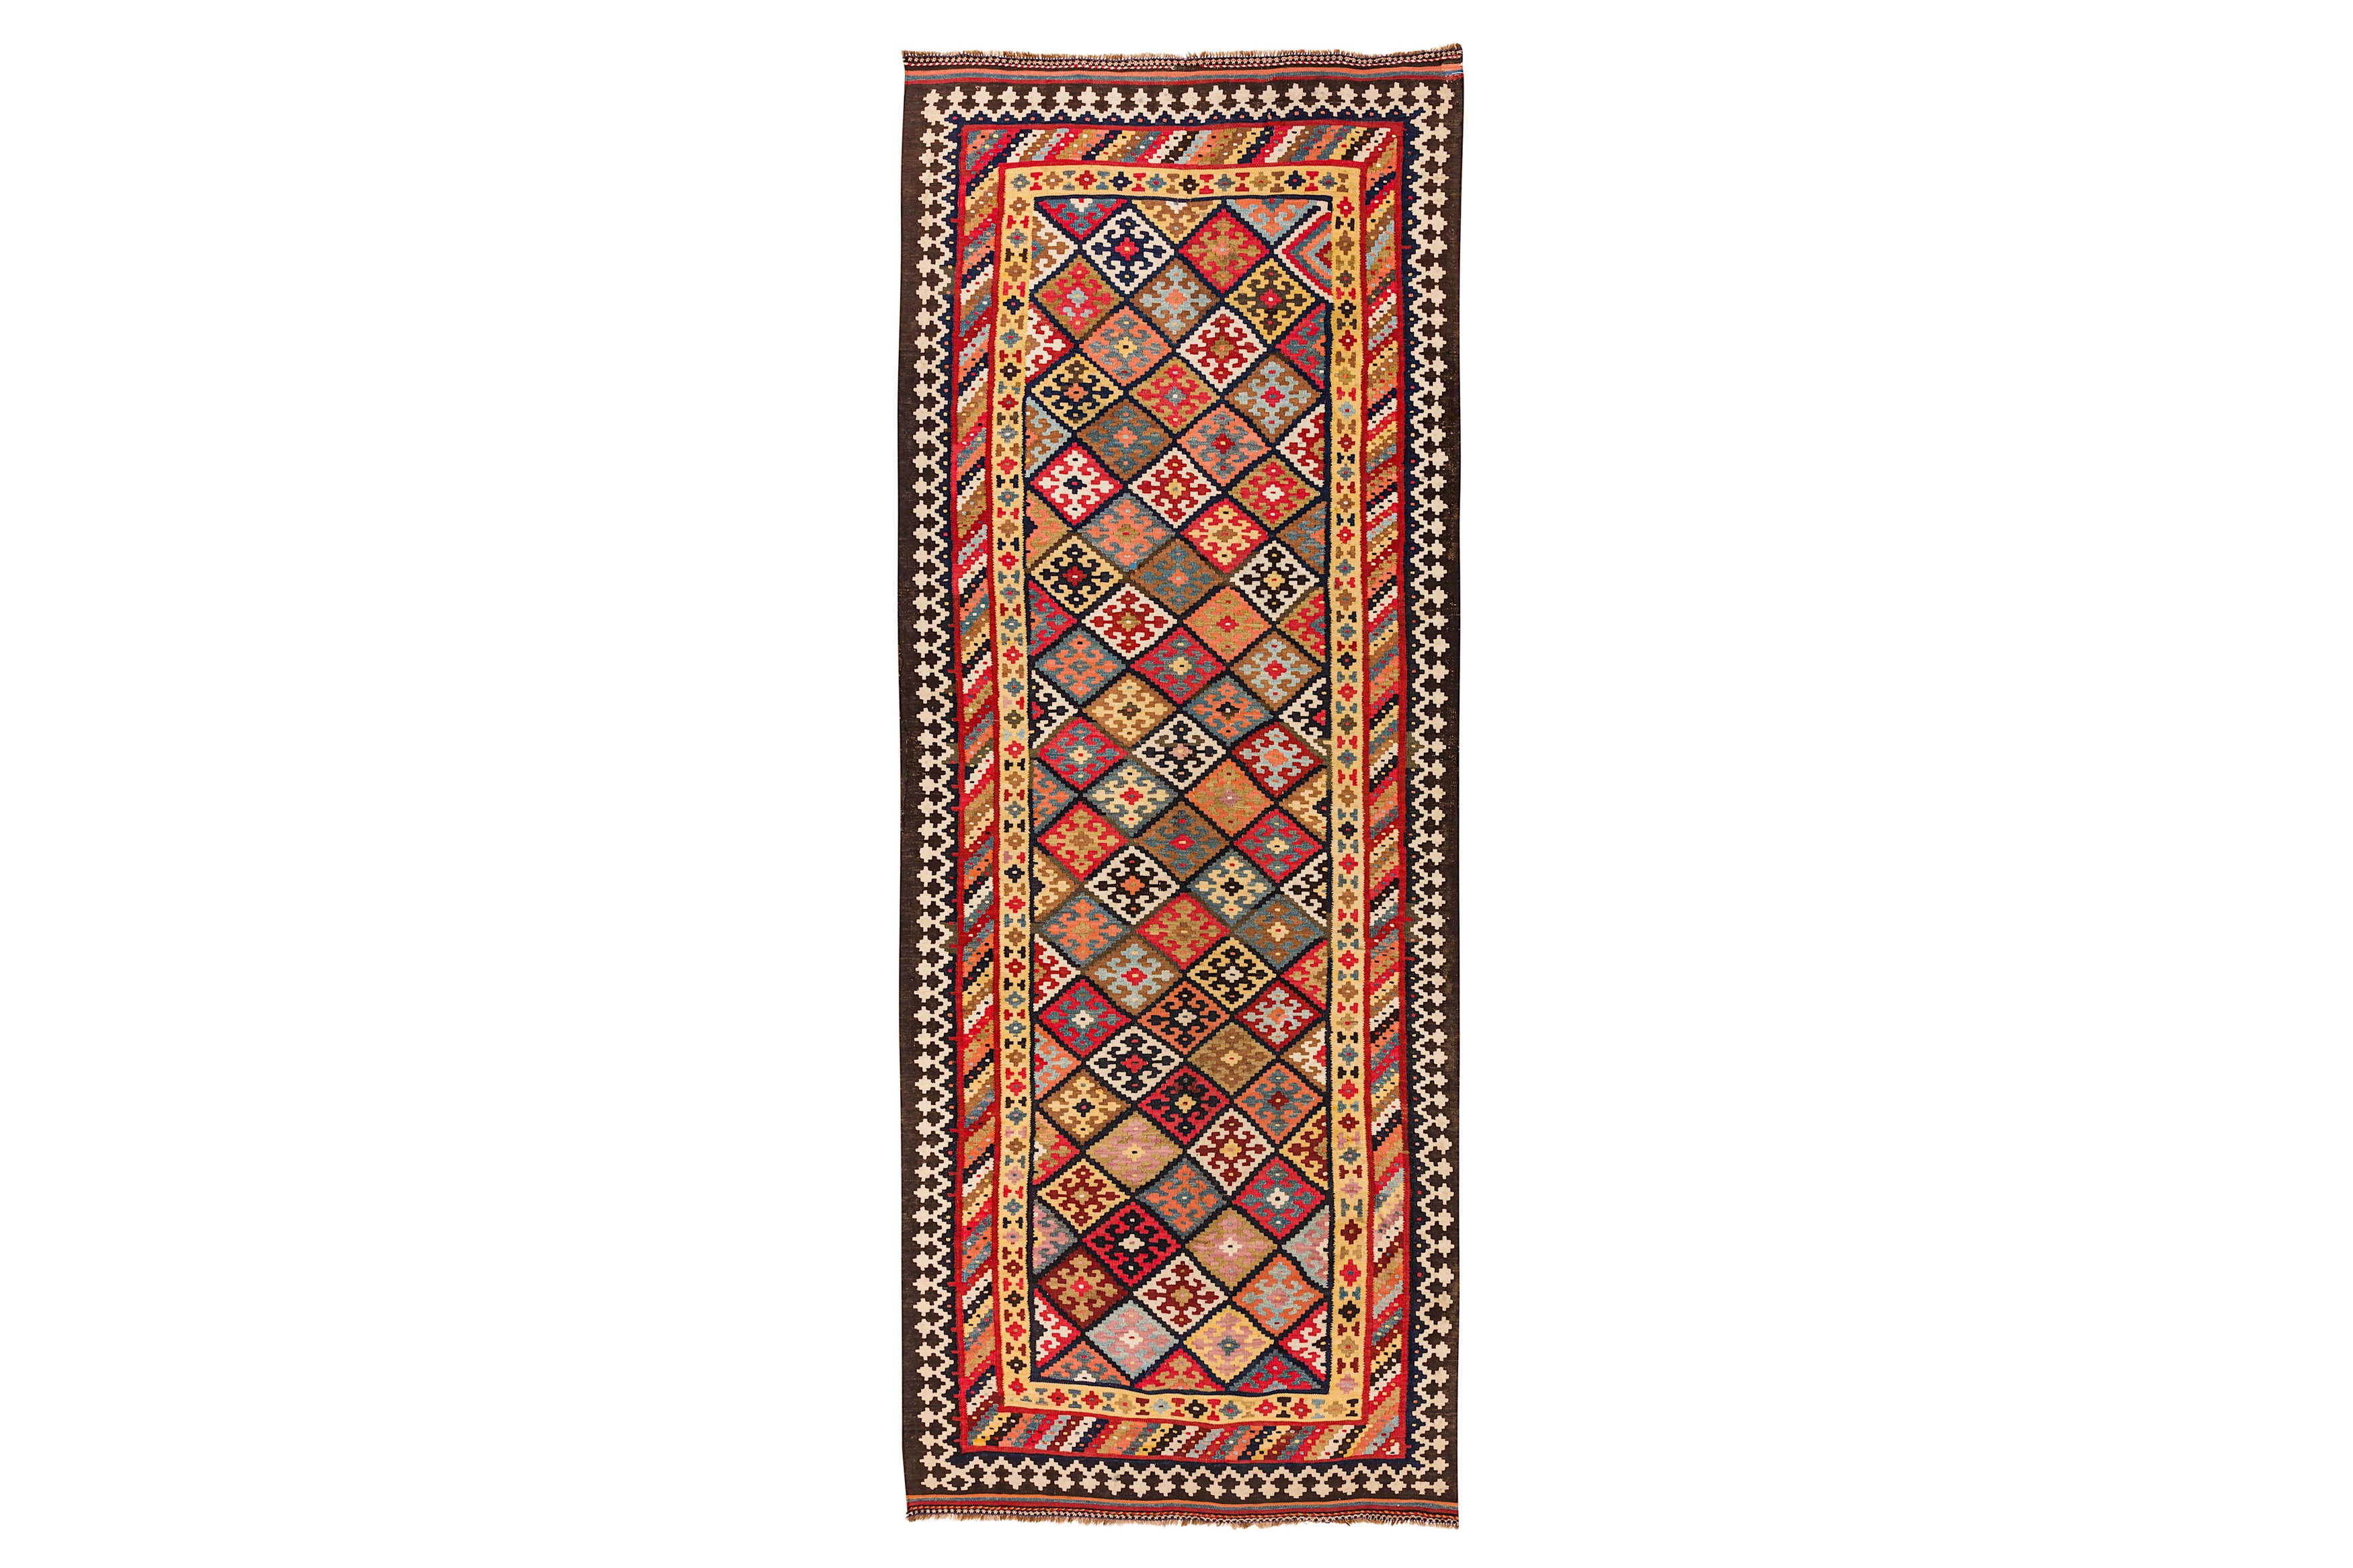 AN ANTIQUE NORTH-WEST PERSIAN KILIM RUNNER